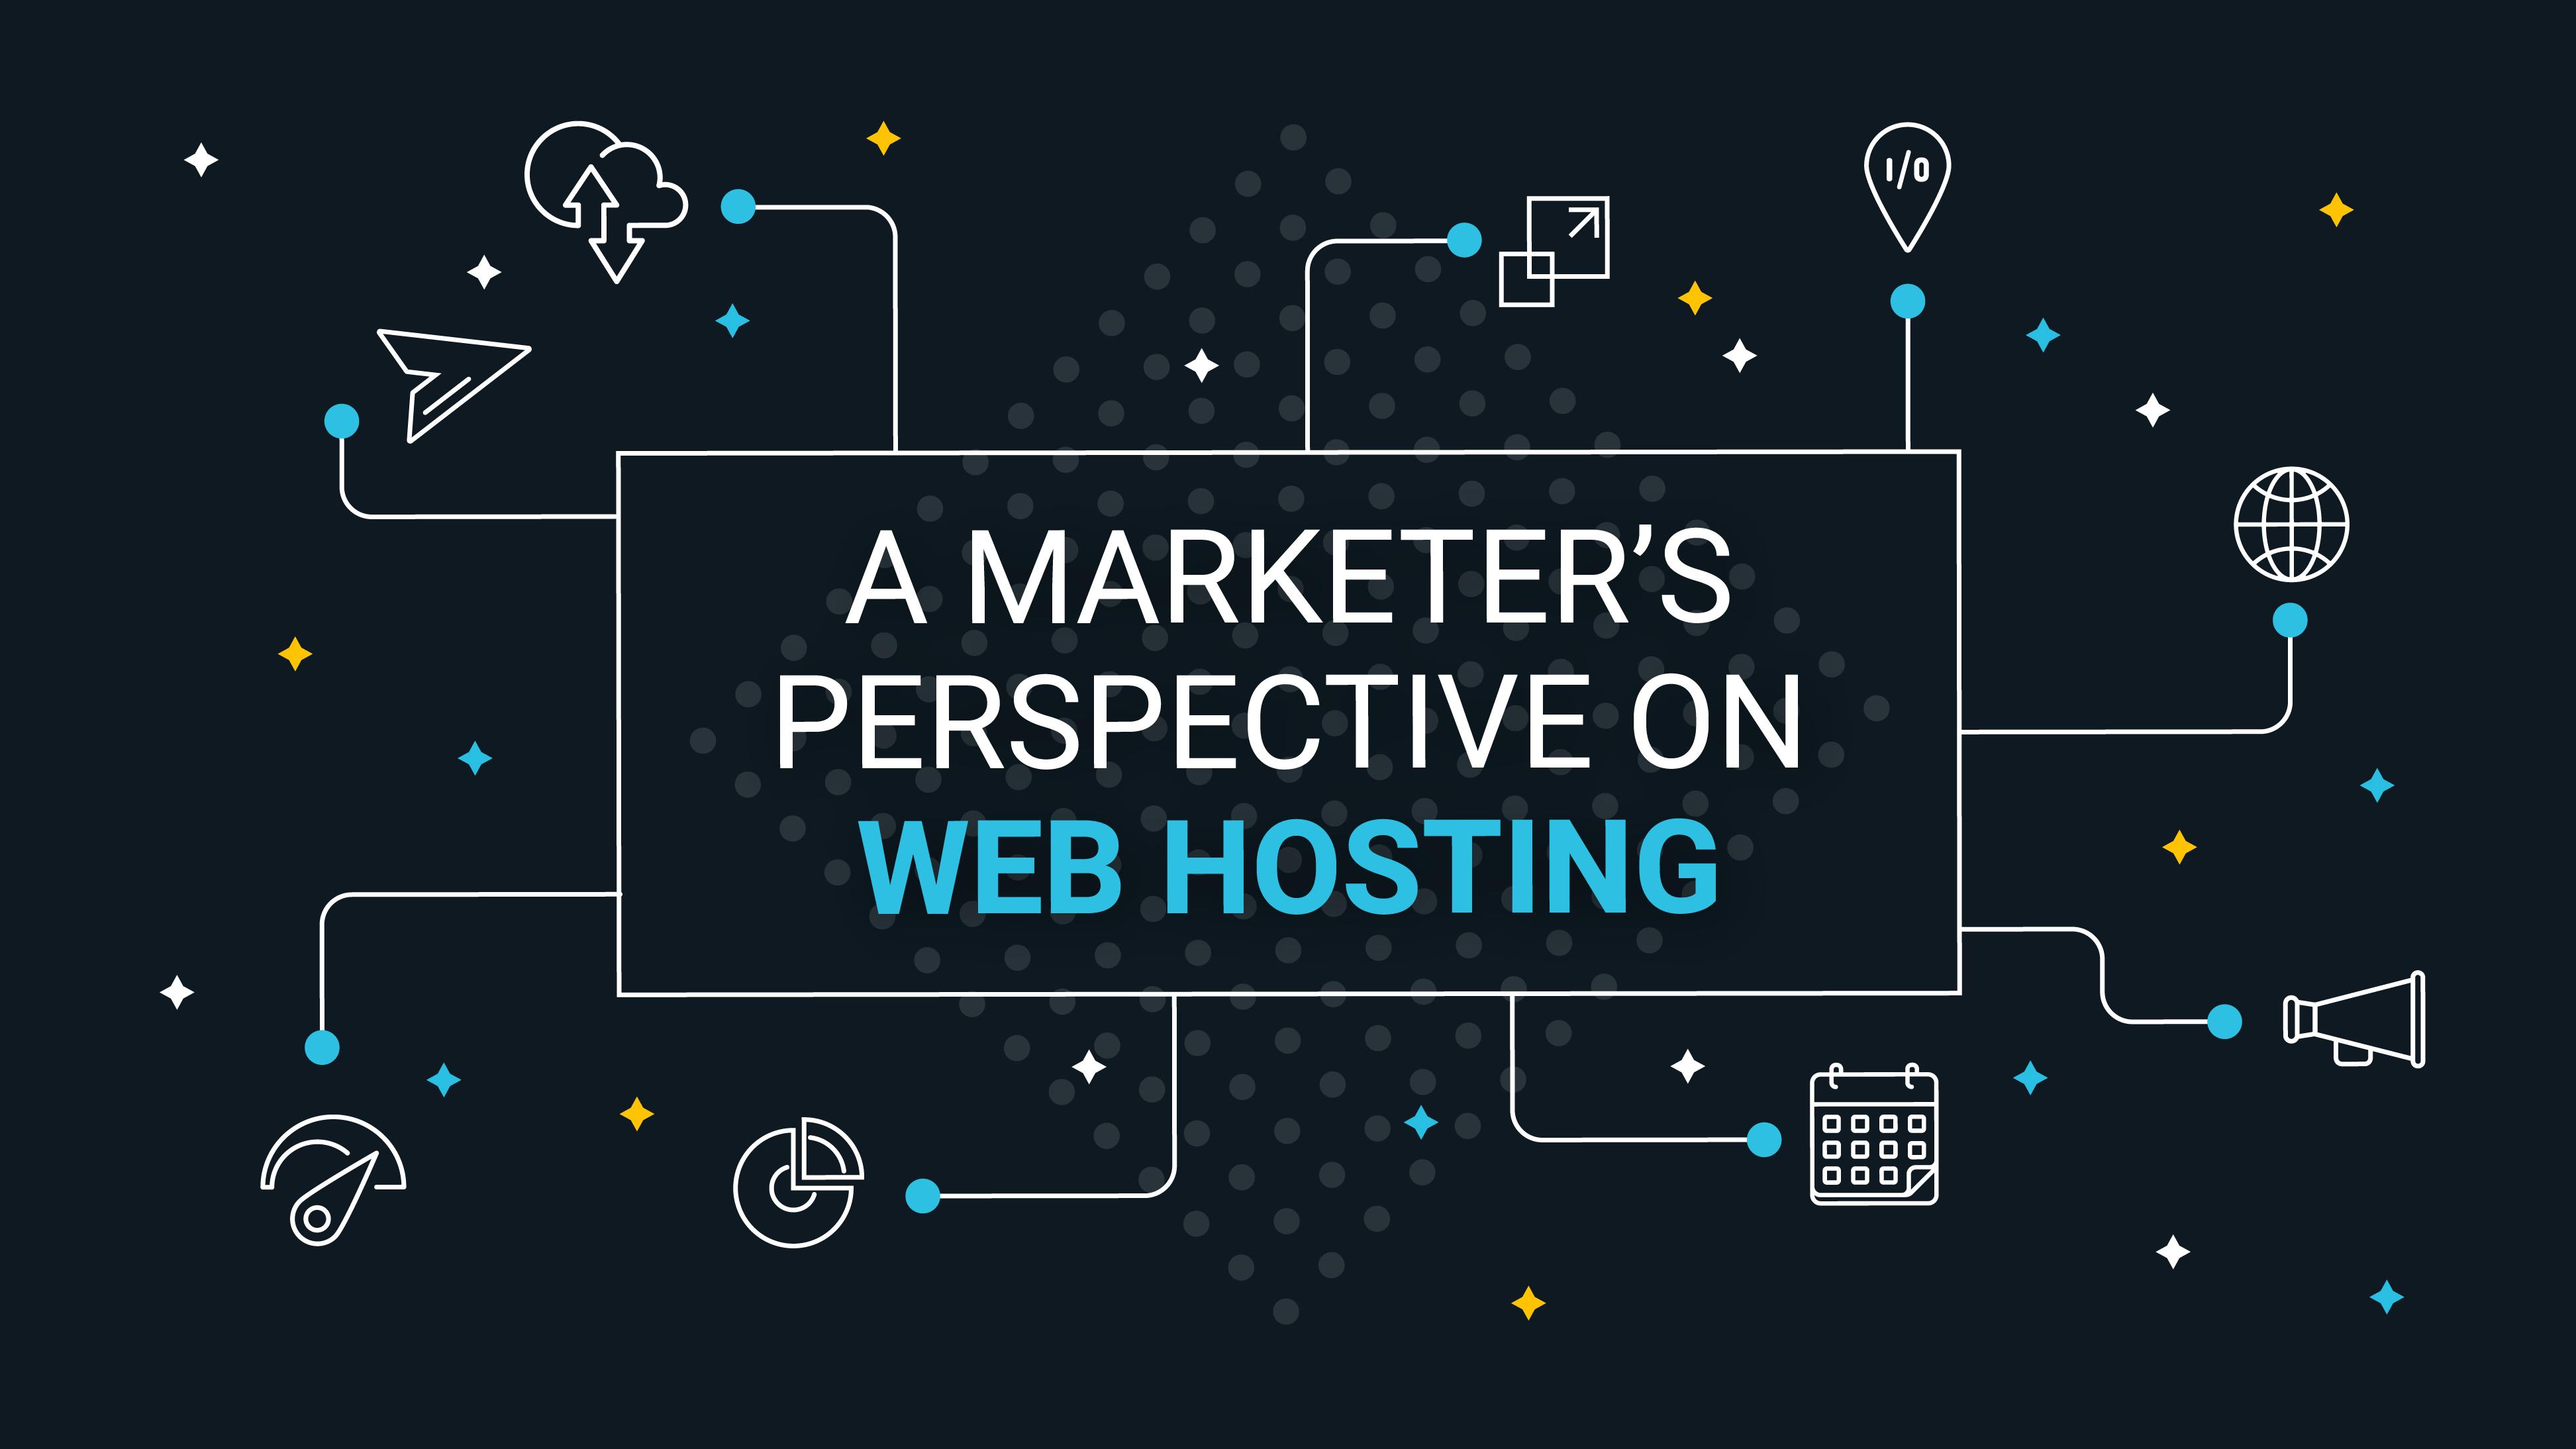 A Marketer's Perspective on Web Hosting